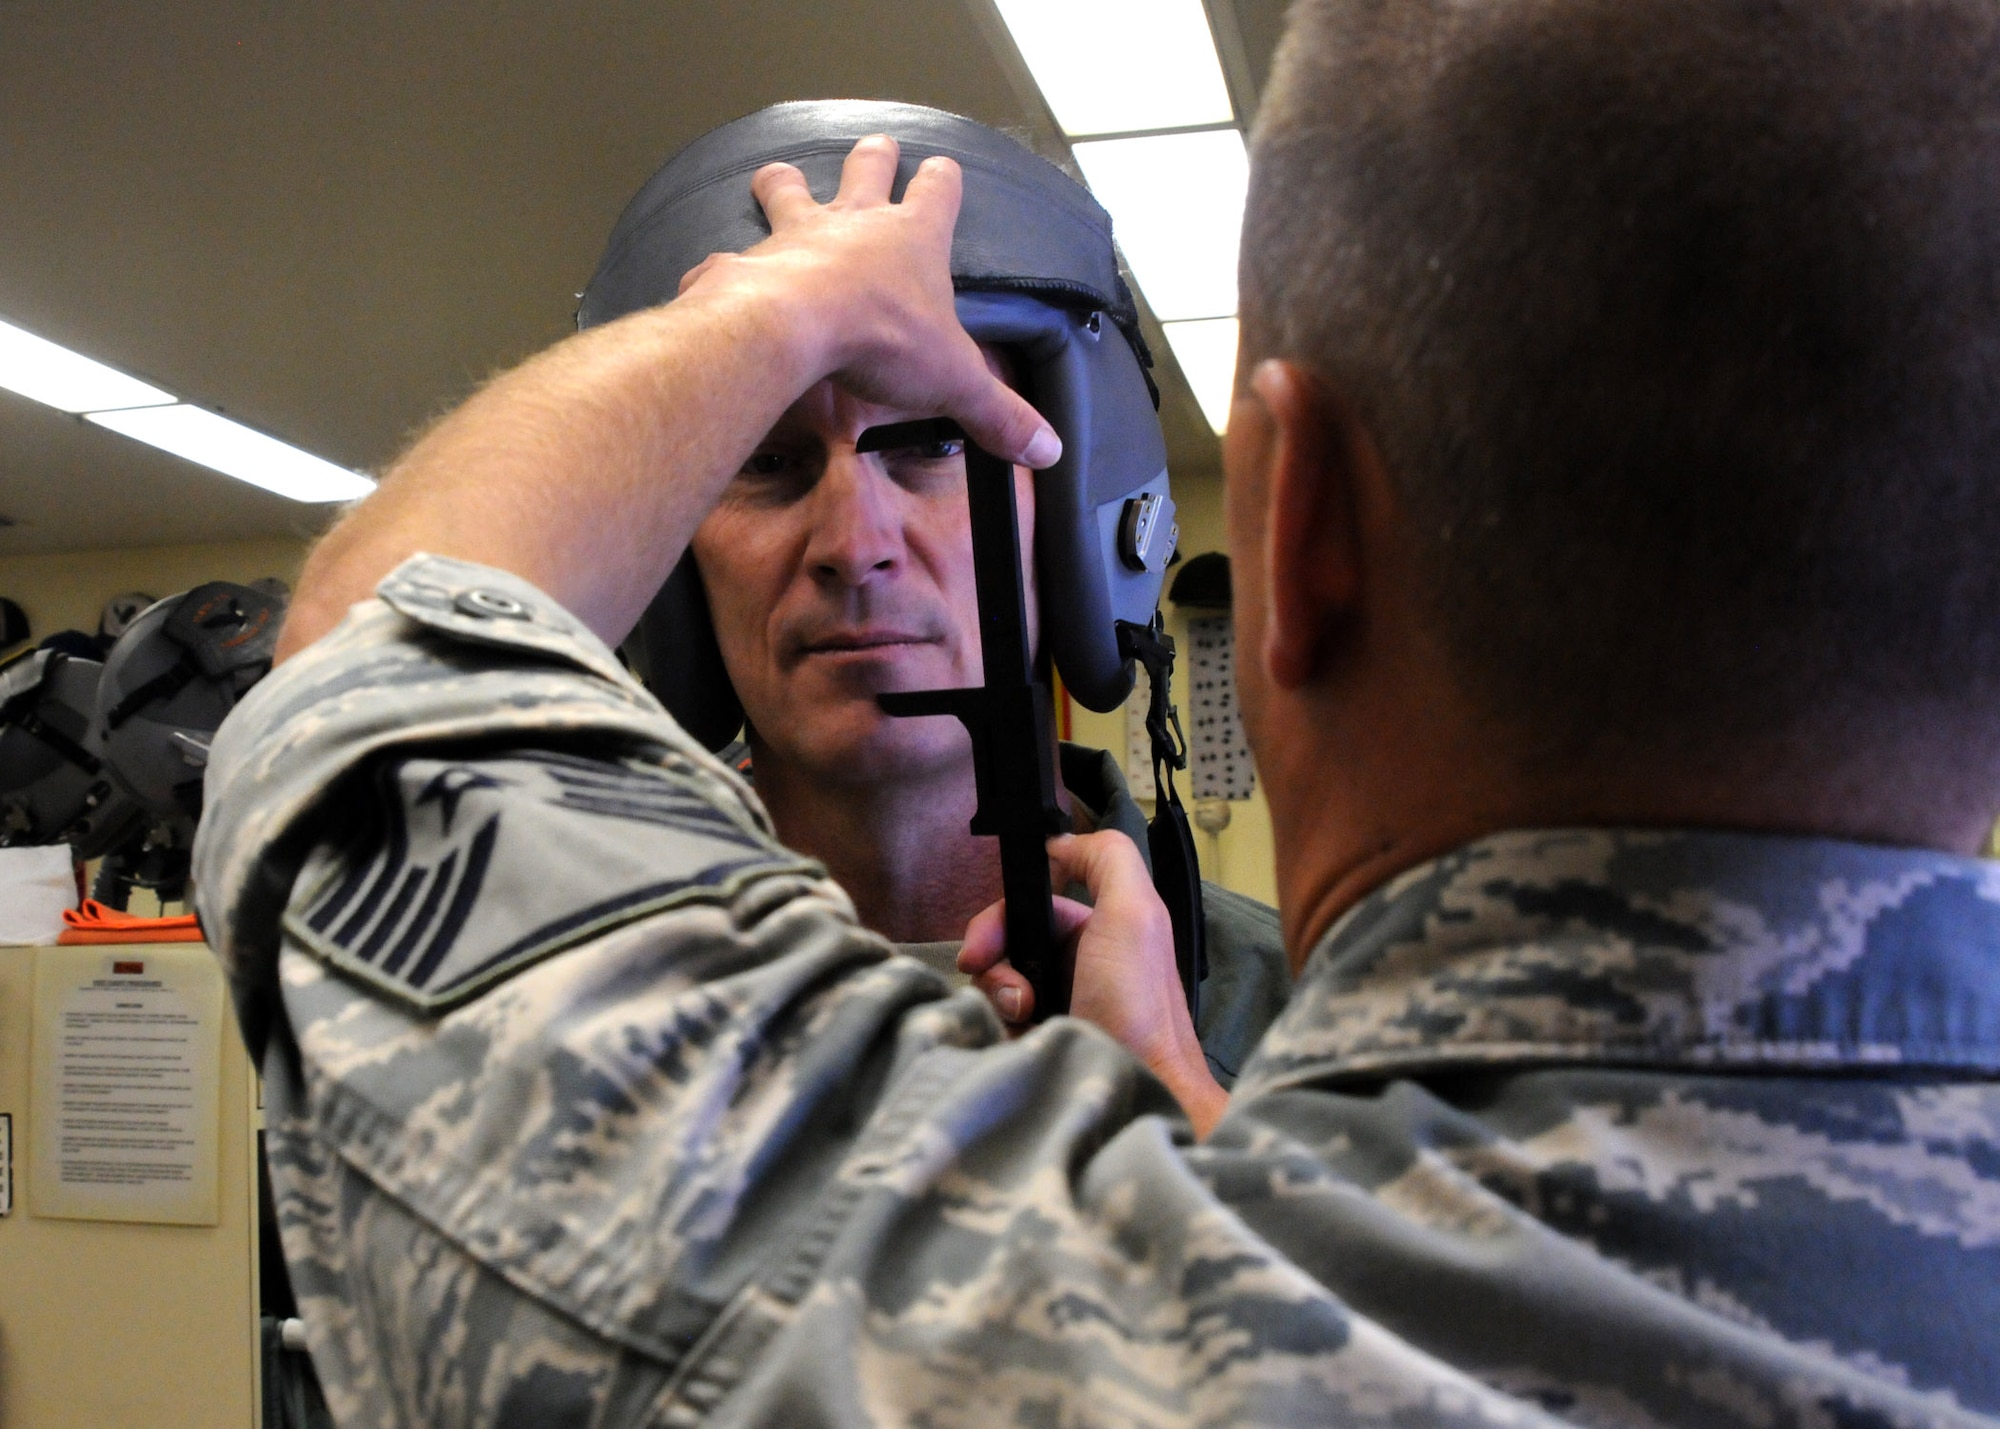 Maj. Gen. Timothy Zadalis, Director of Intelligence Operations and Nuclear Integration Headquarters at Air Education and Training Command, begins preparations for his familiarization flight in an F-15 Eagle with the help of Master Sgt. Kenneth Shearer, 114th Fighter Squadron, at Kingsley Field, Ore., July 24, 2012. Kingsley Field was just moved under the command of Zadalis earlier this year. (Air National Guard photo by Airman 1st Class Penny Hamilton/Released)